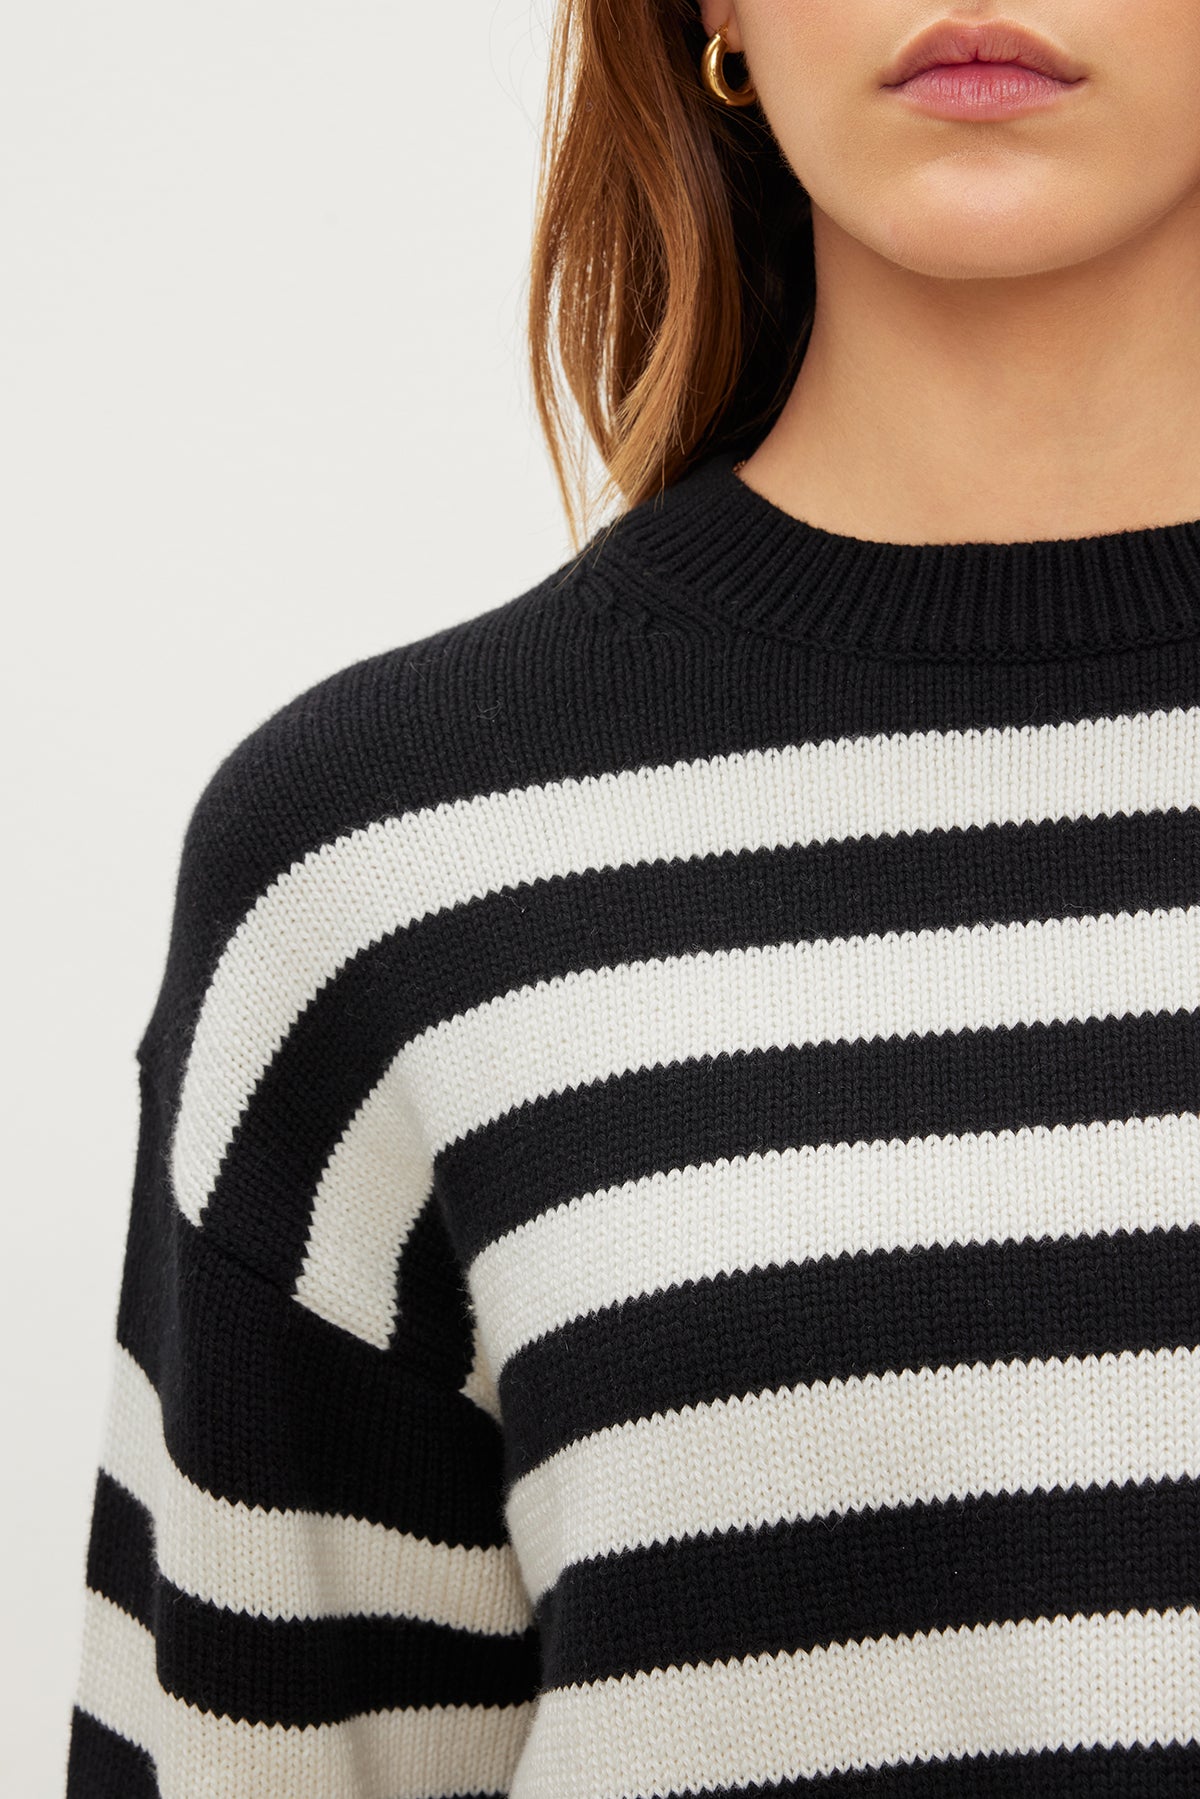 The model is wearing a Velvet by Graham & Spencer LEX STRIPED CREW NECK SWEATER.-35967621955777